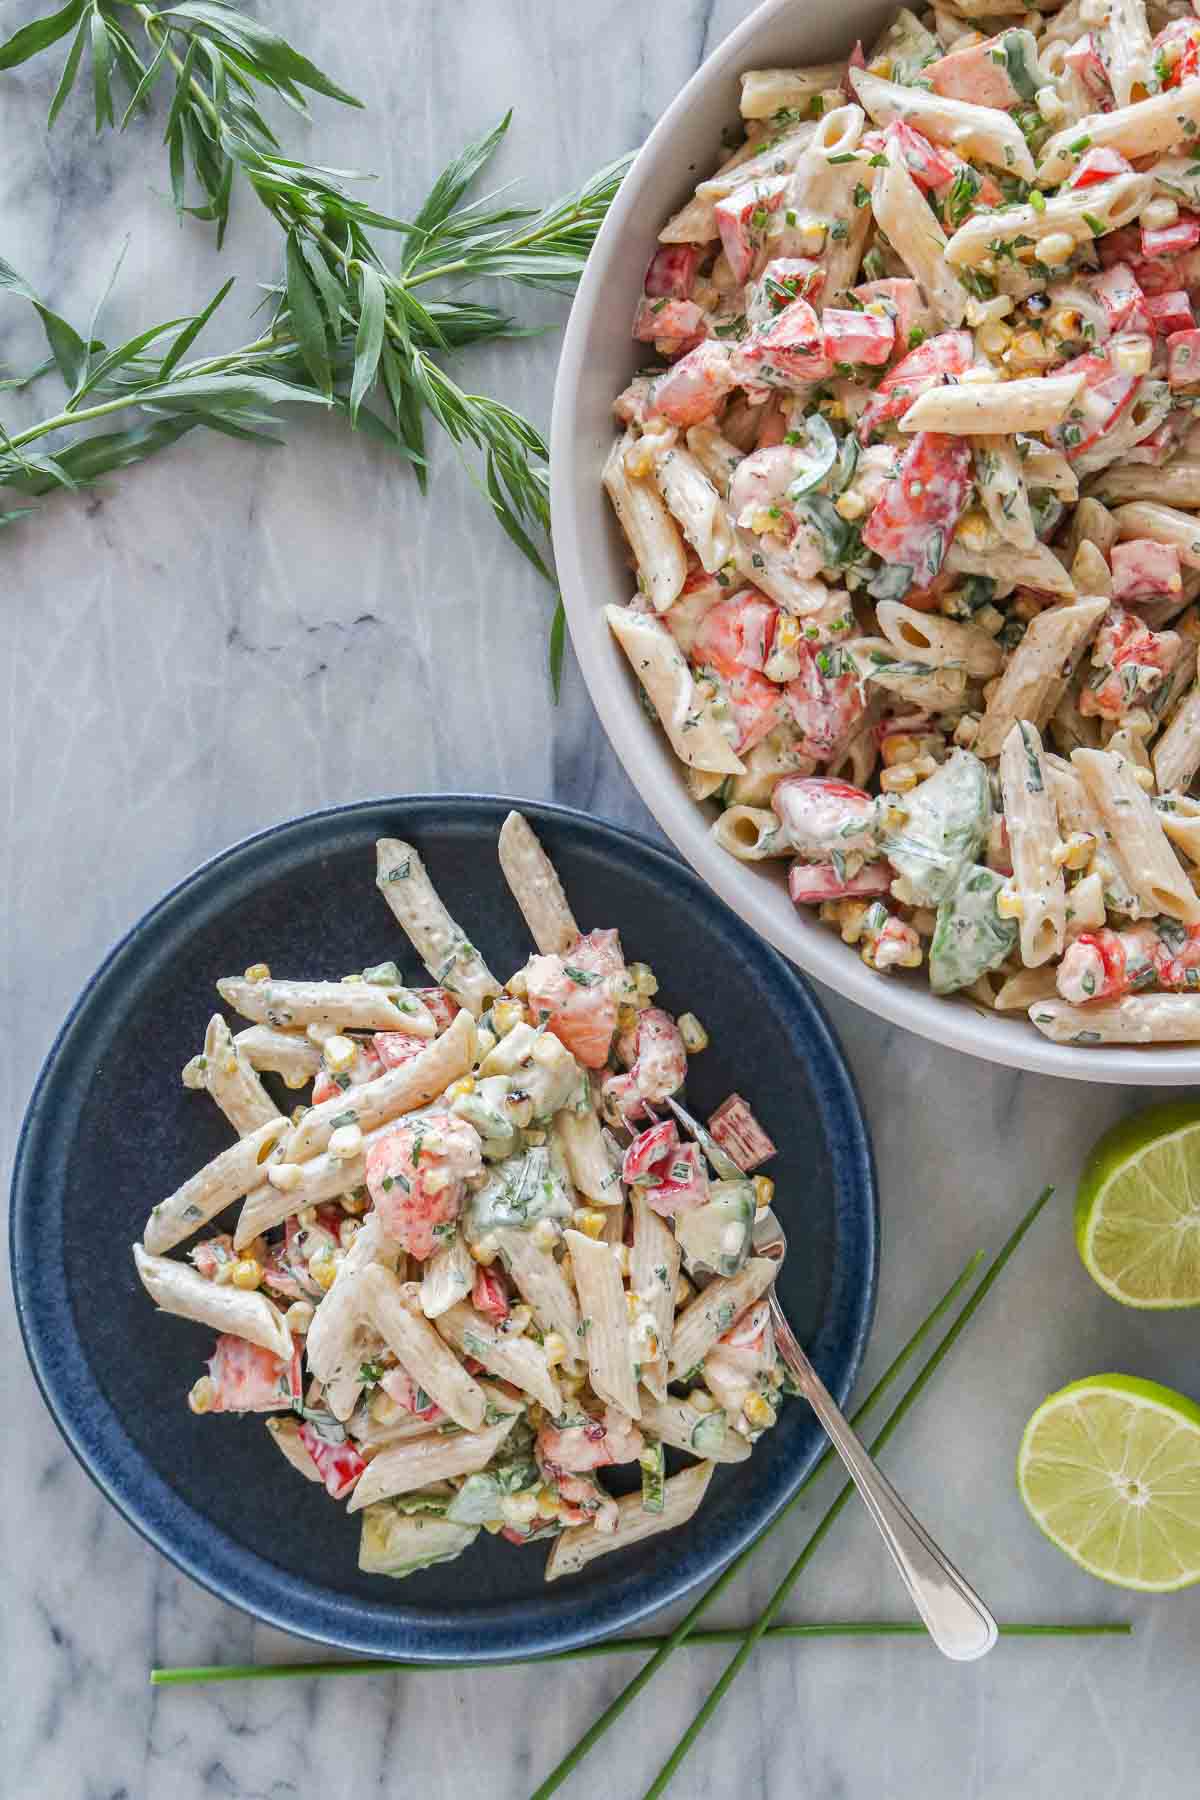 Lobster pasta salad, some on a plate and some in a serving bowl.